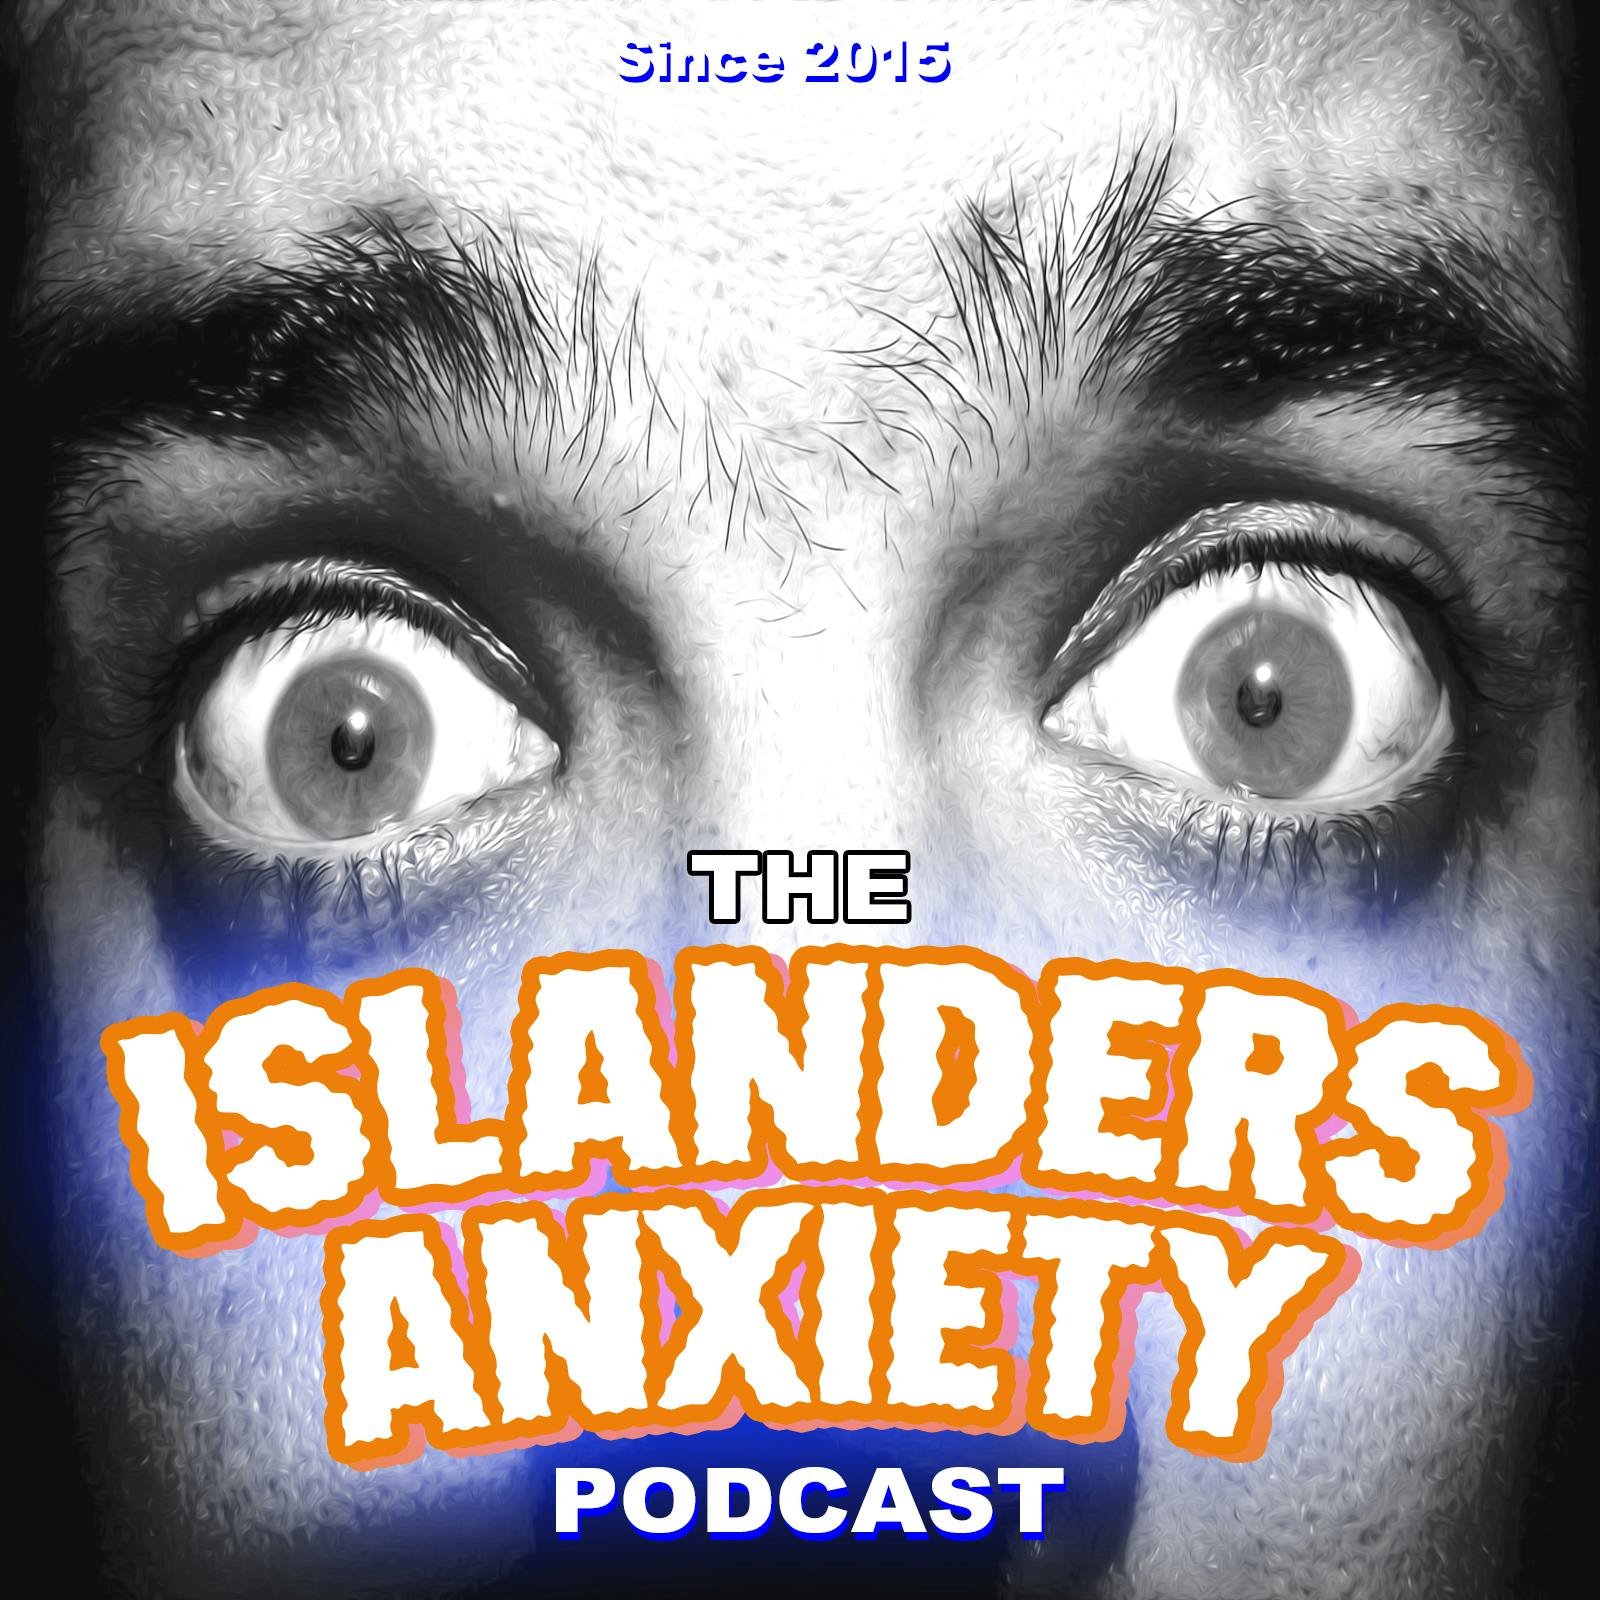 Islanders Anxiety - Episode 264 - A New Phase